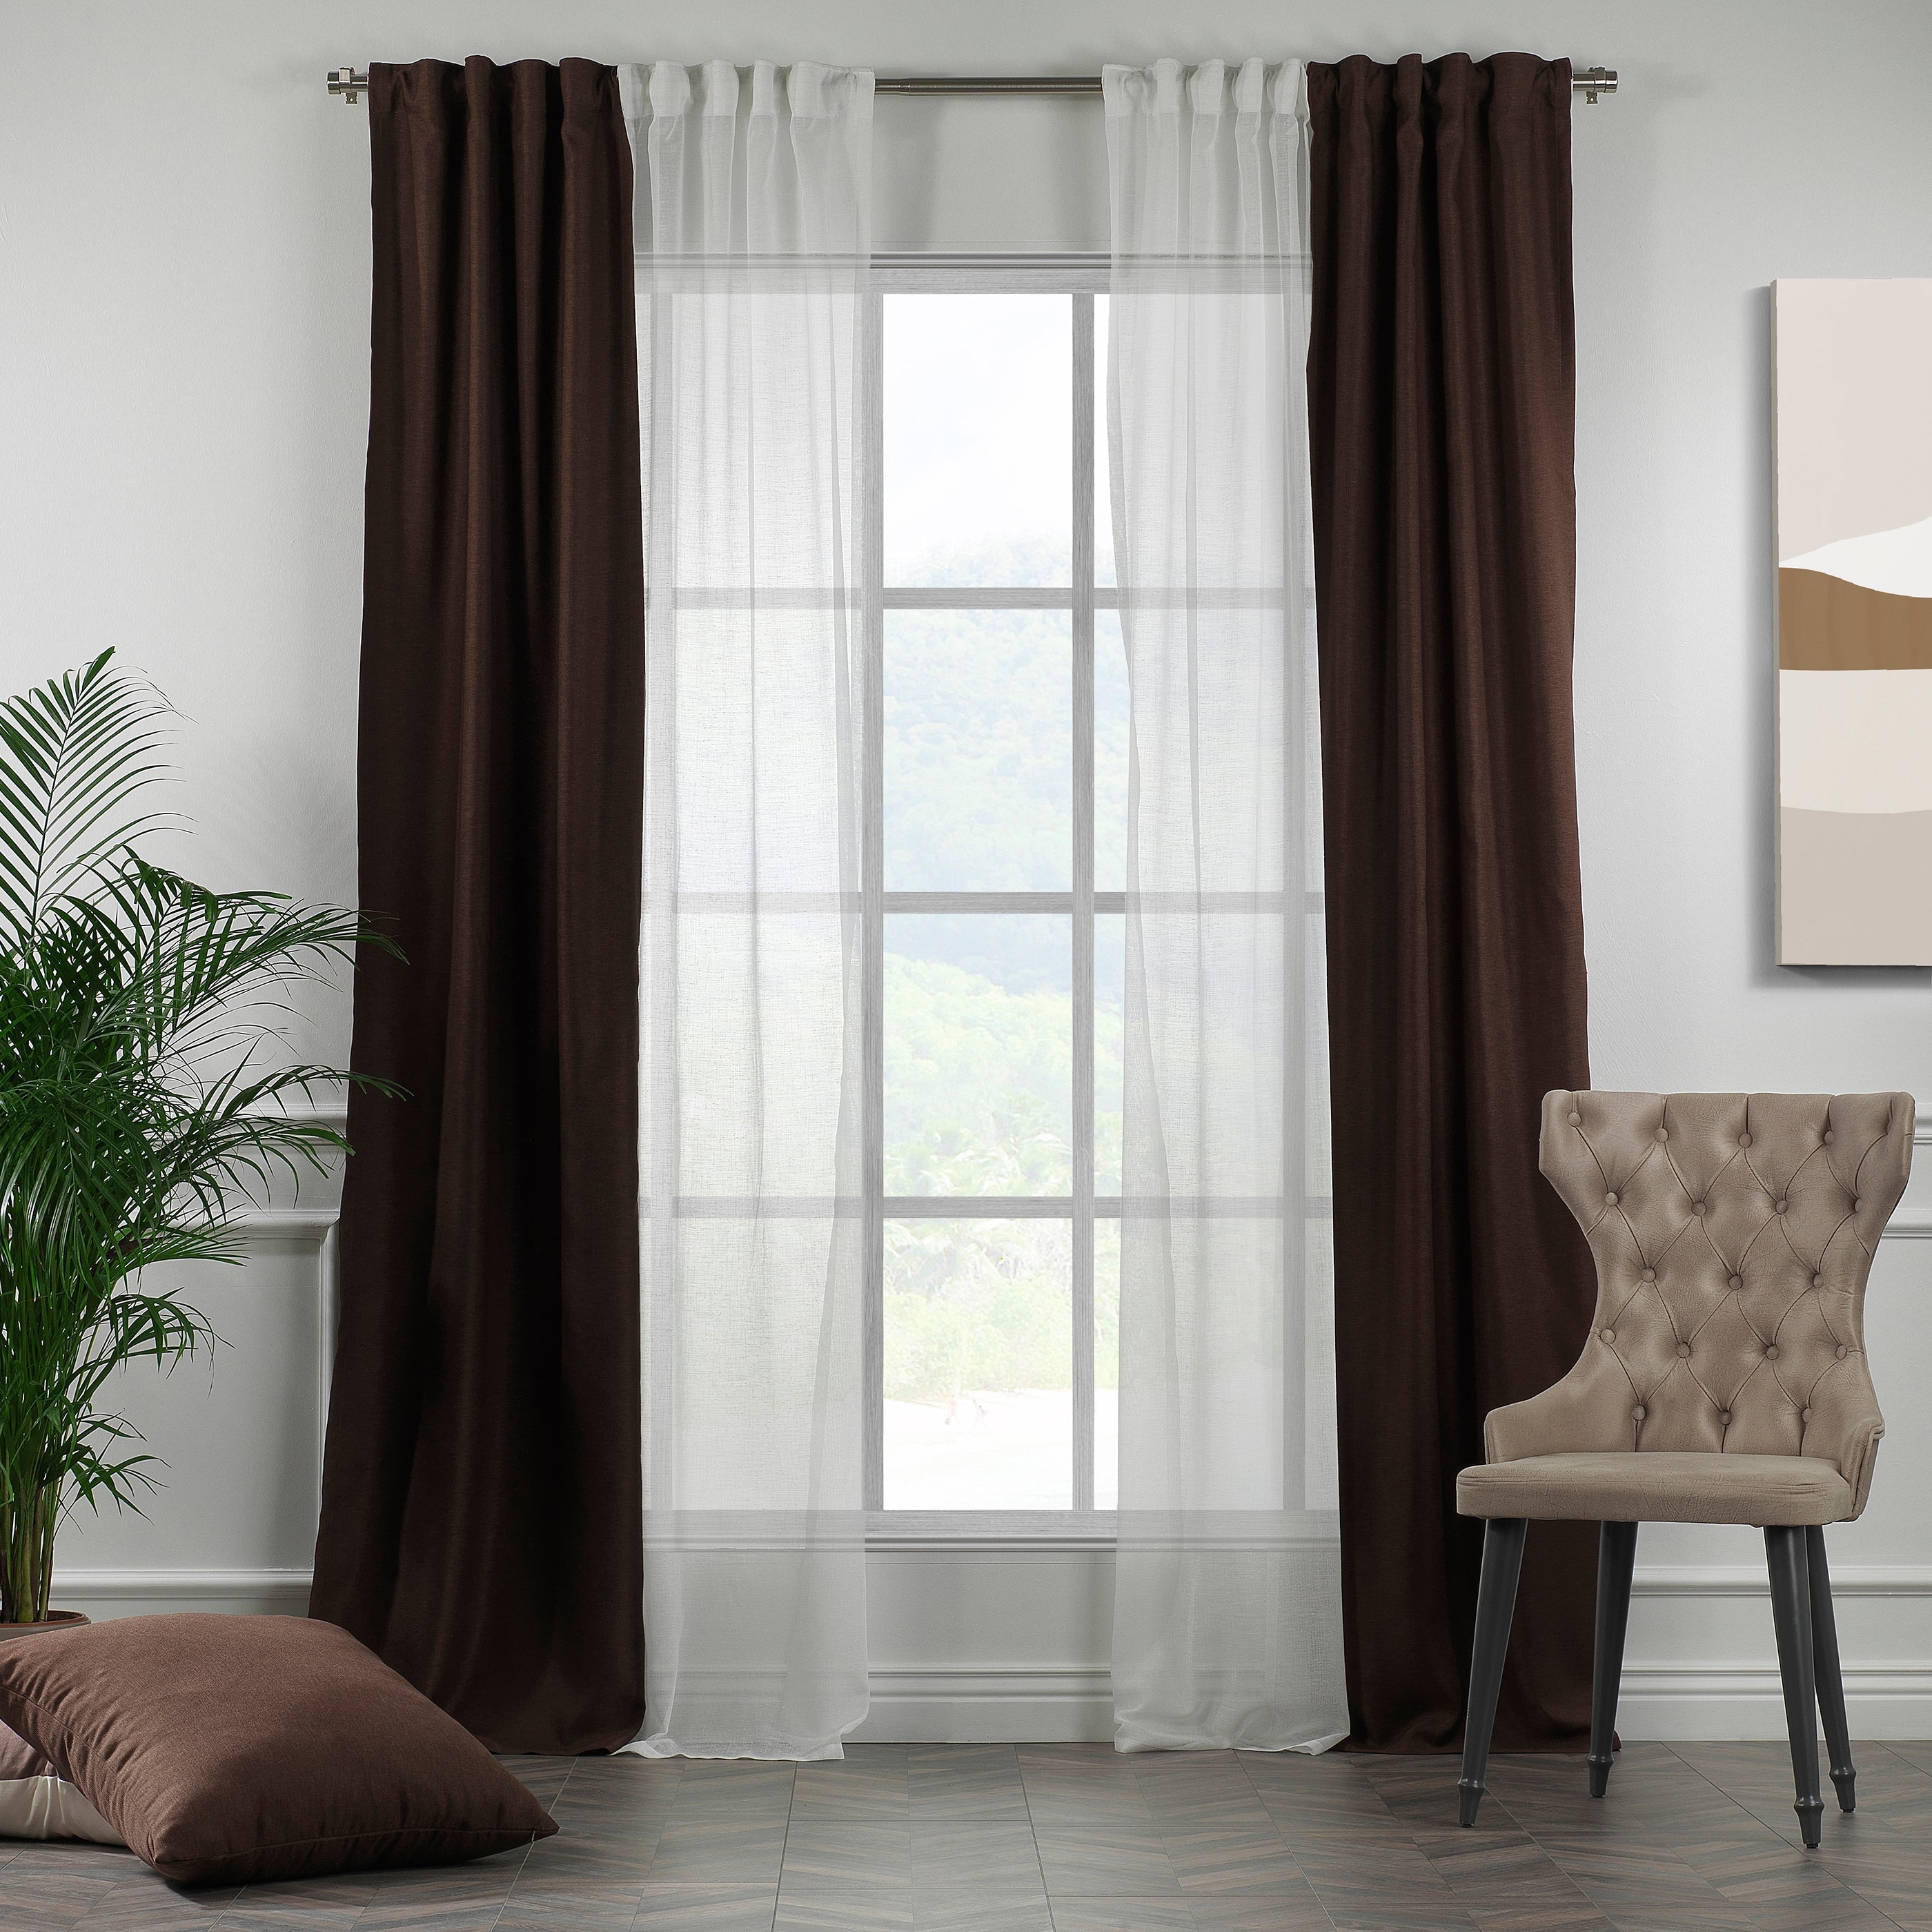 Mix And Match 4 Panels Curtains 2 Solid Decorative Linen Look Sheer Beshomedesign